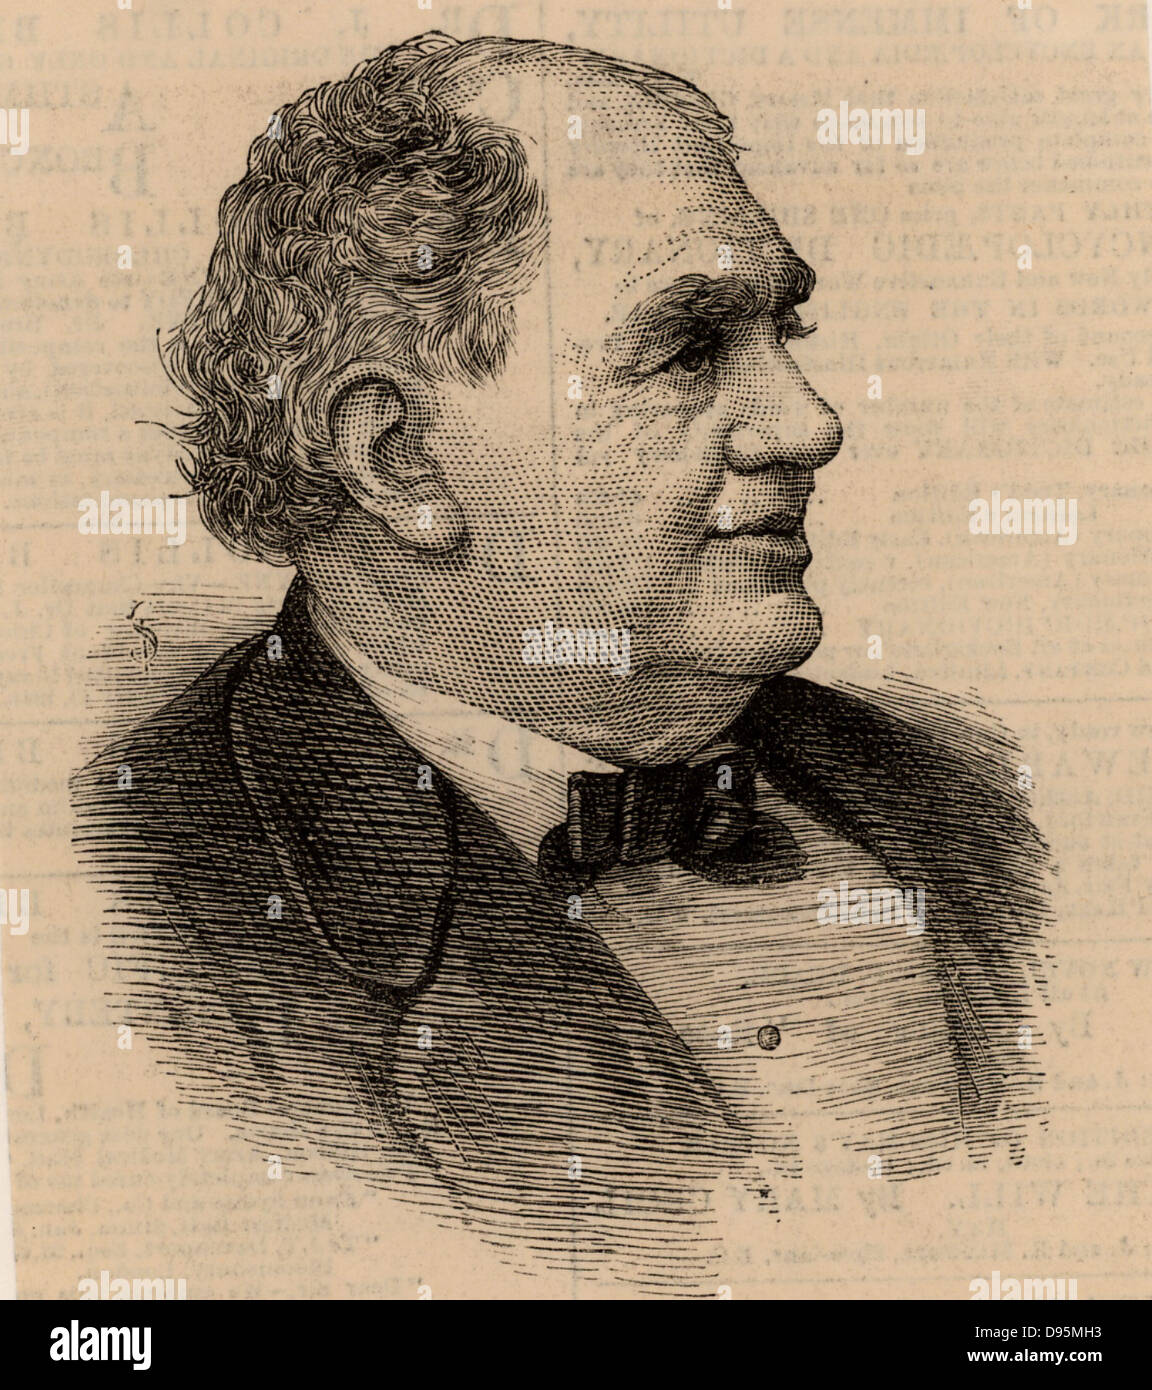 Phineas Taylor Barnum (1810-1891) American showman. Co-founder of the famous Barnum and Bailey circus.  Engraving, 1884.. Stock Photo